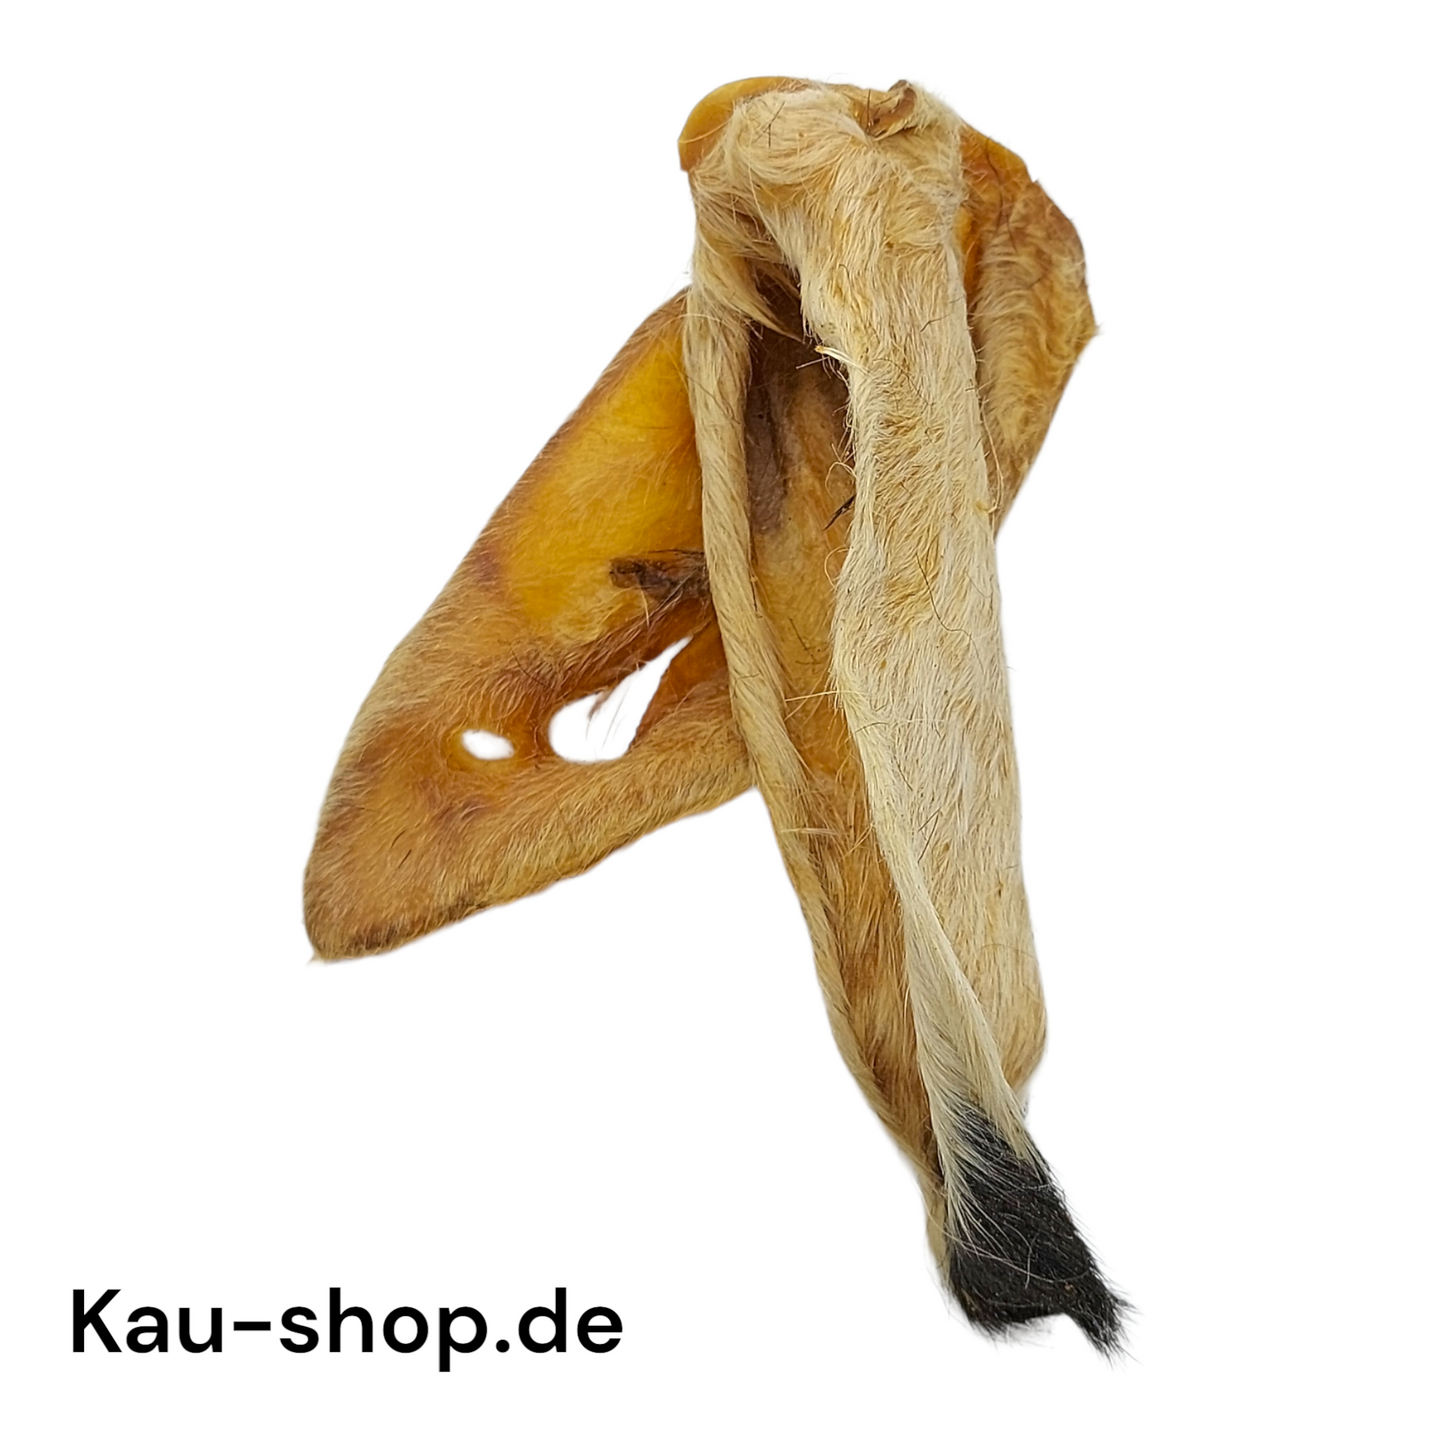 Lamb ears with fur, 200g